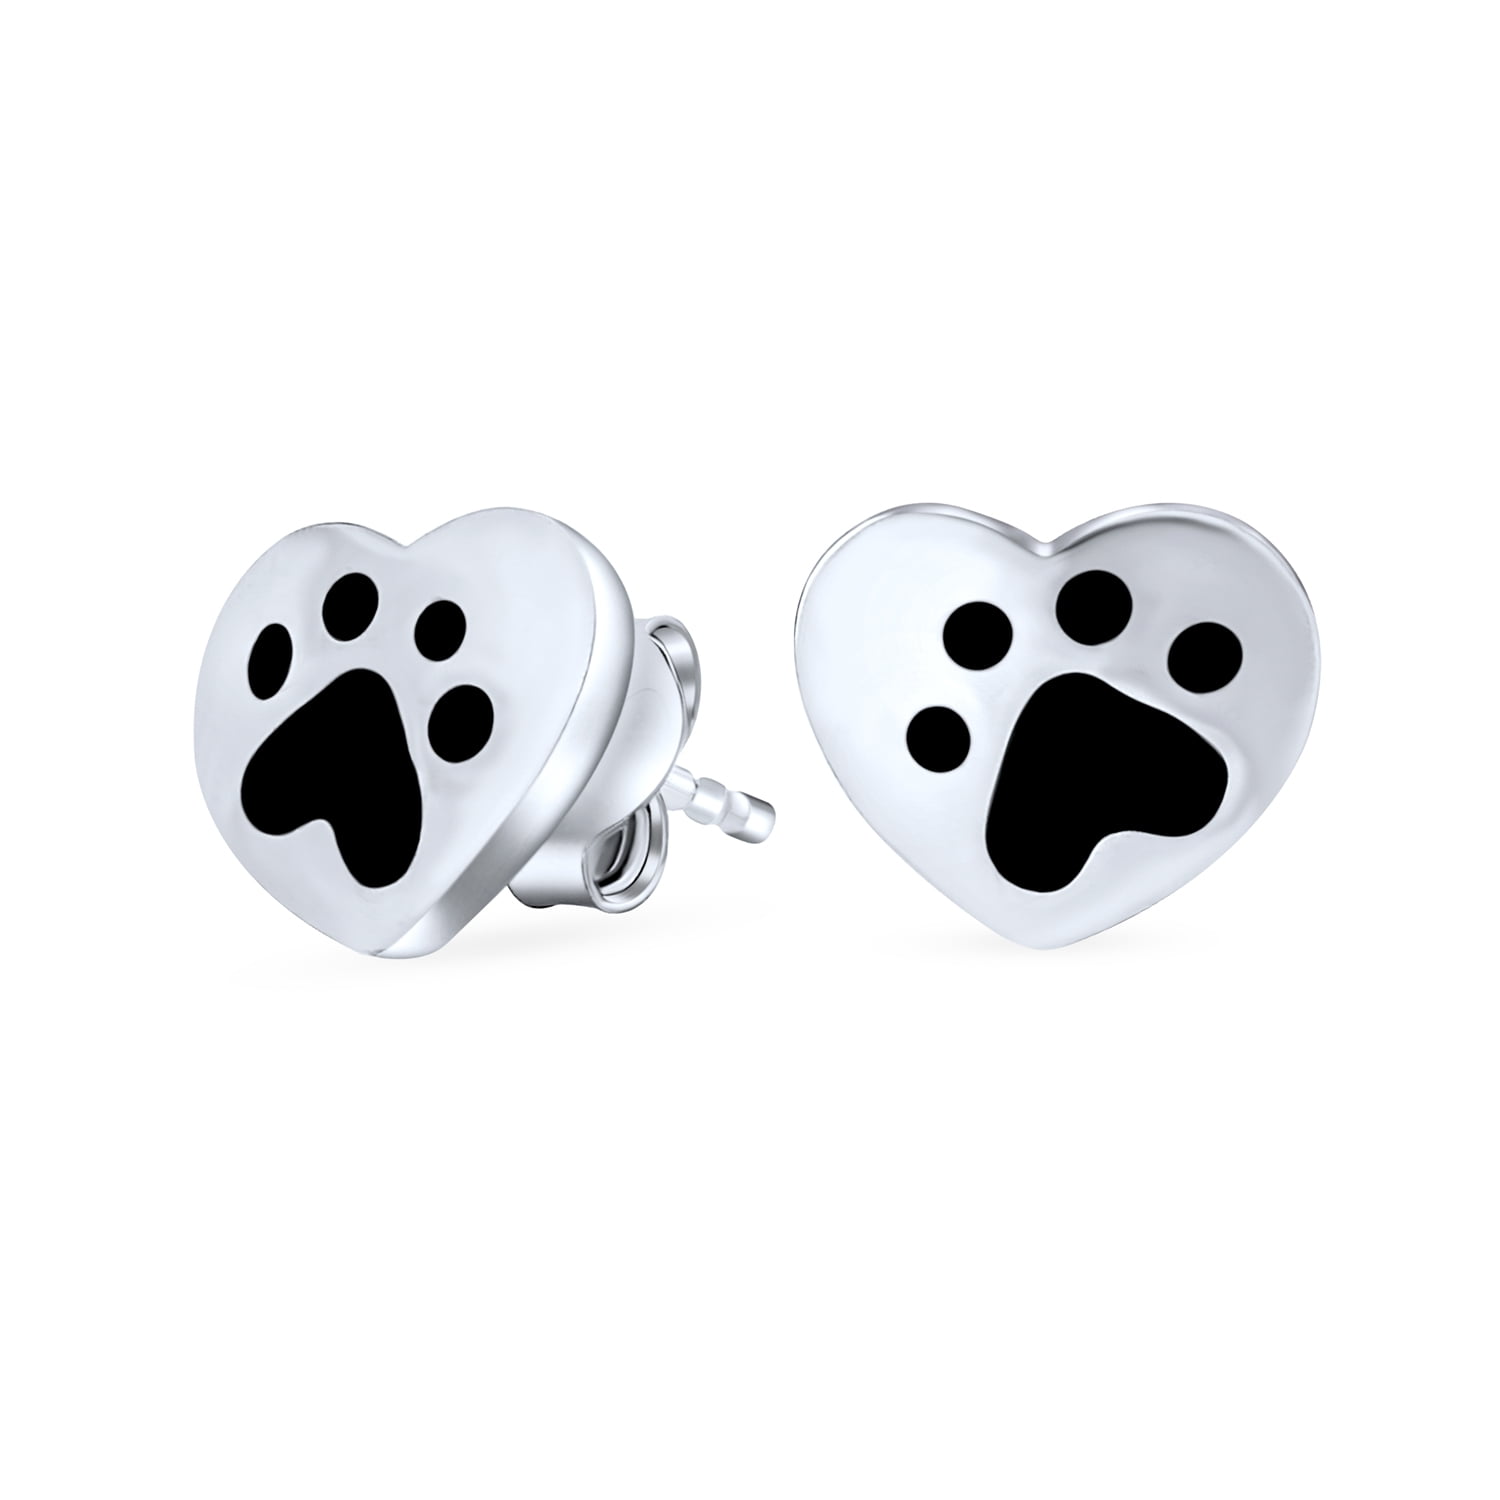 Dog Earrings made with Enamel and 925 Sterling Silver for Women